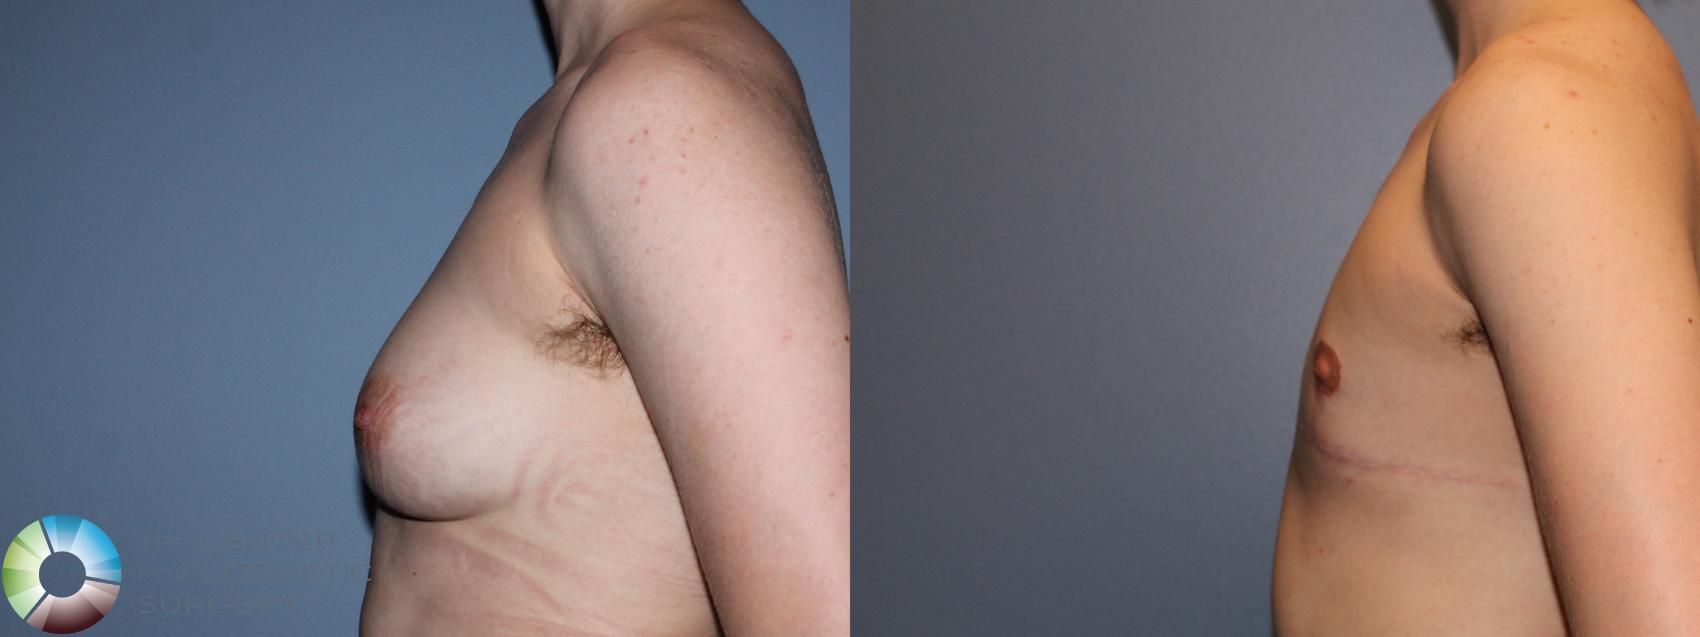 Before & After FTM Top Surgery/Chest Masculinization Case 11477 Left Side in Denver and Colorado Springs, CO